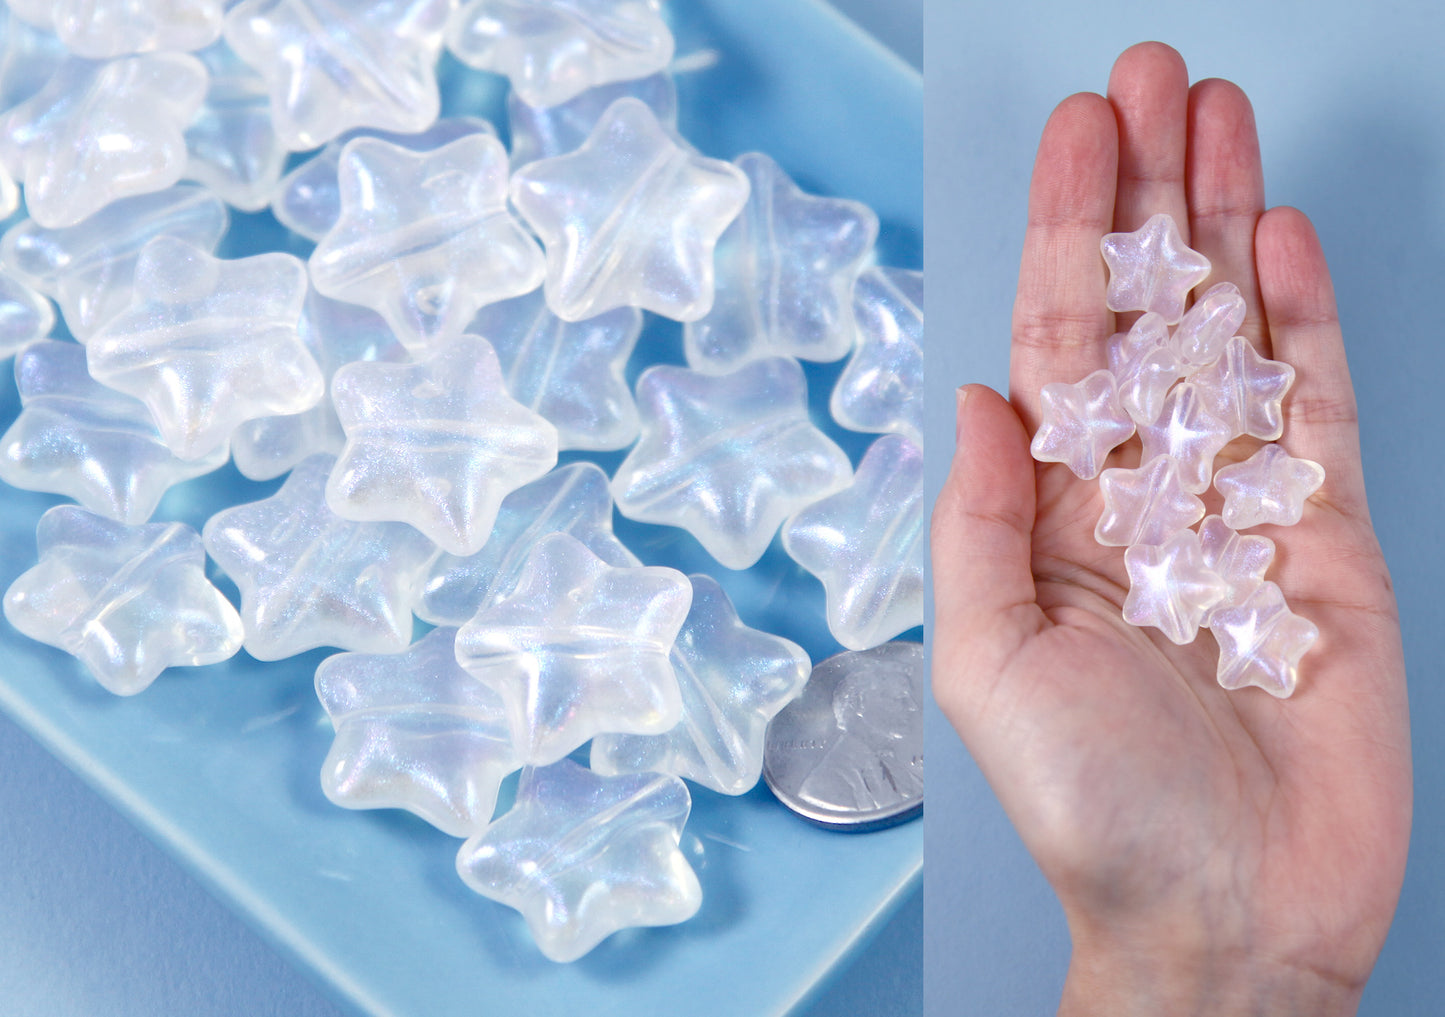 Star Beads - 20mm AB Iridescent Shimmer White Star Resin or Acrylic Beads - 20 pc set